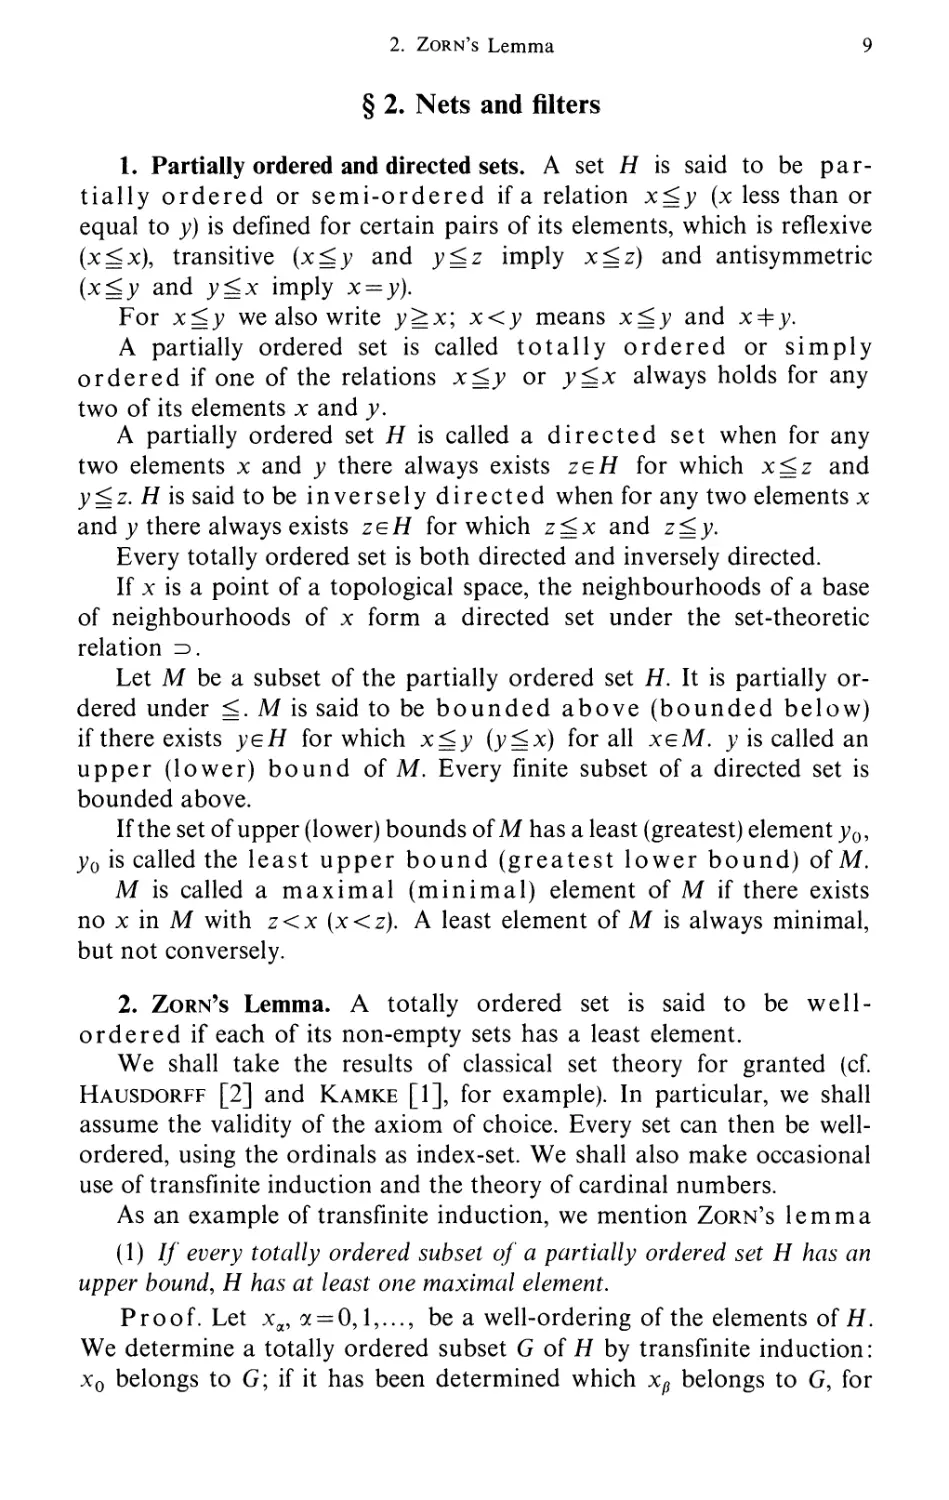 §2. Nets and filters
2. Zorn's lemma